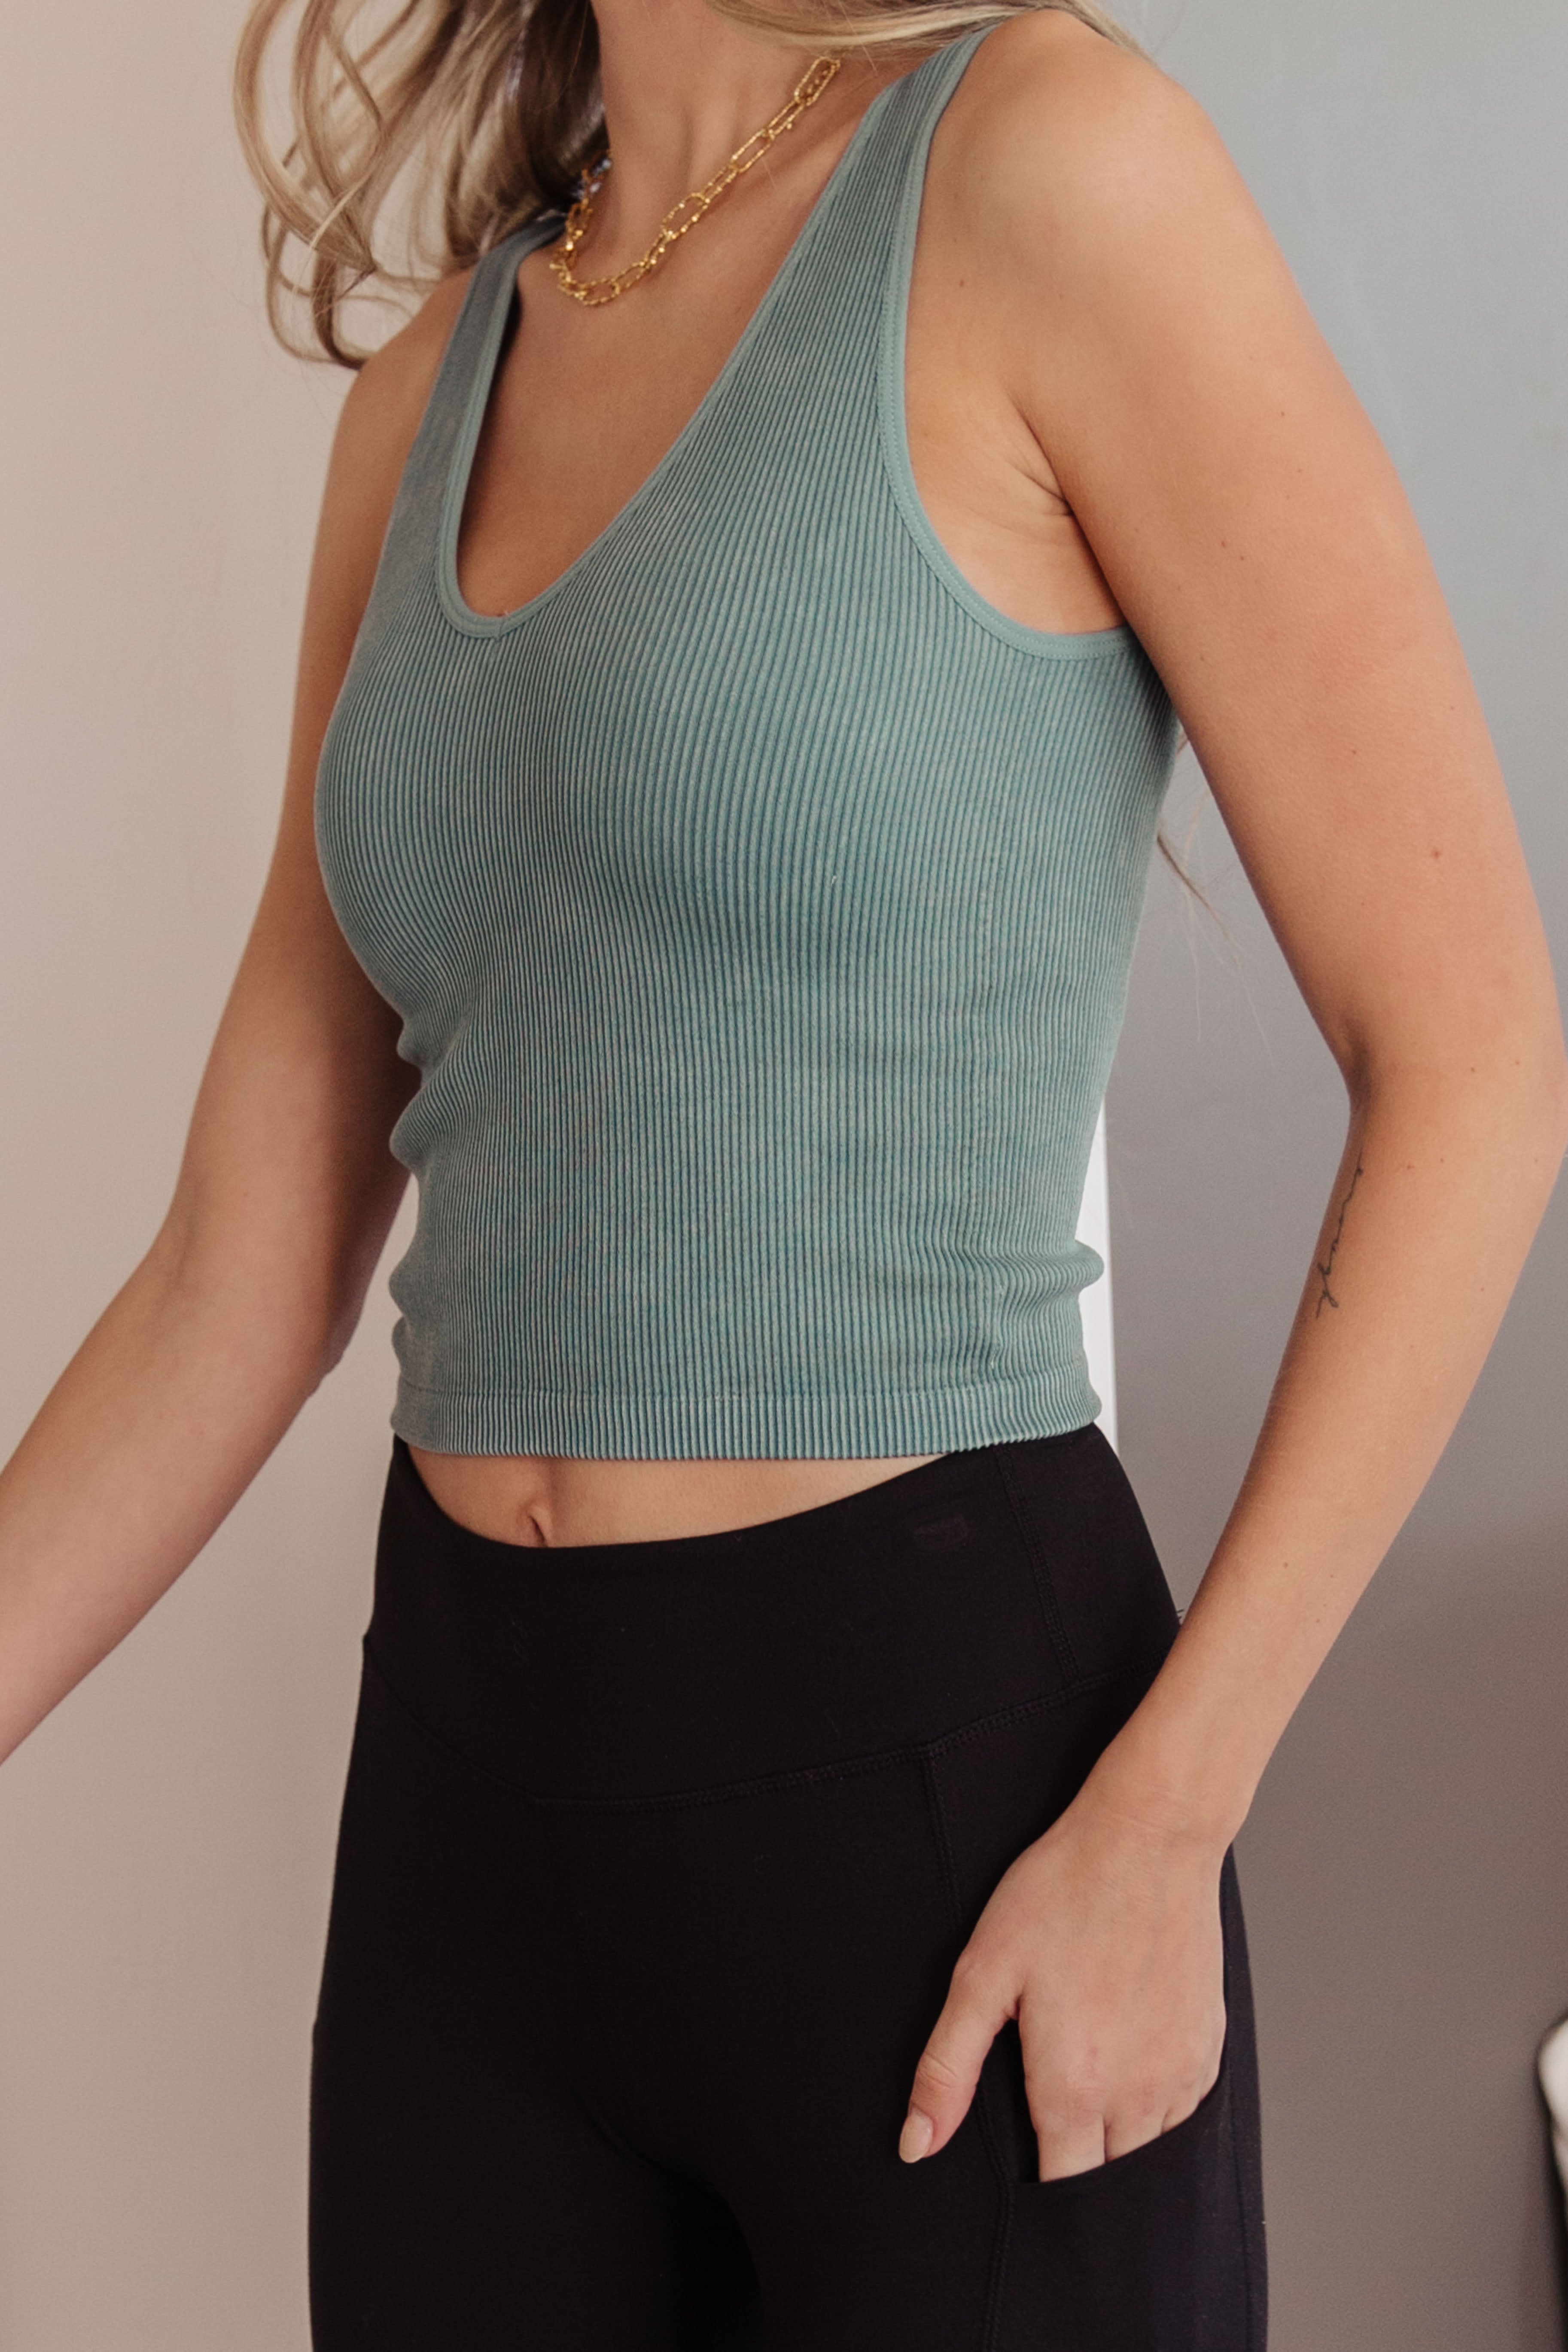 Fundamentals Ribbed Seamless Reversible Tank in Vintage Blue - 2/15